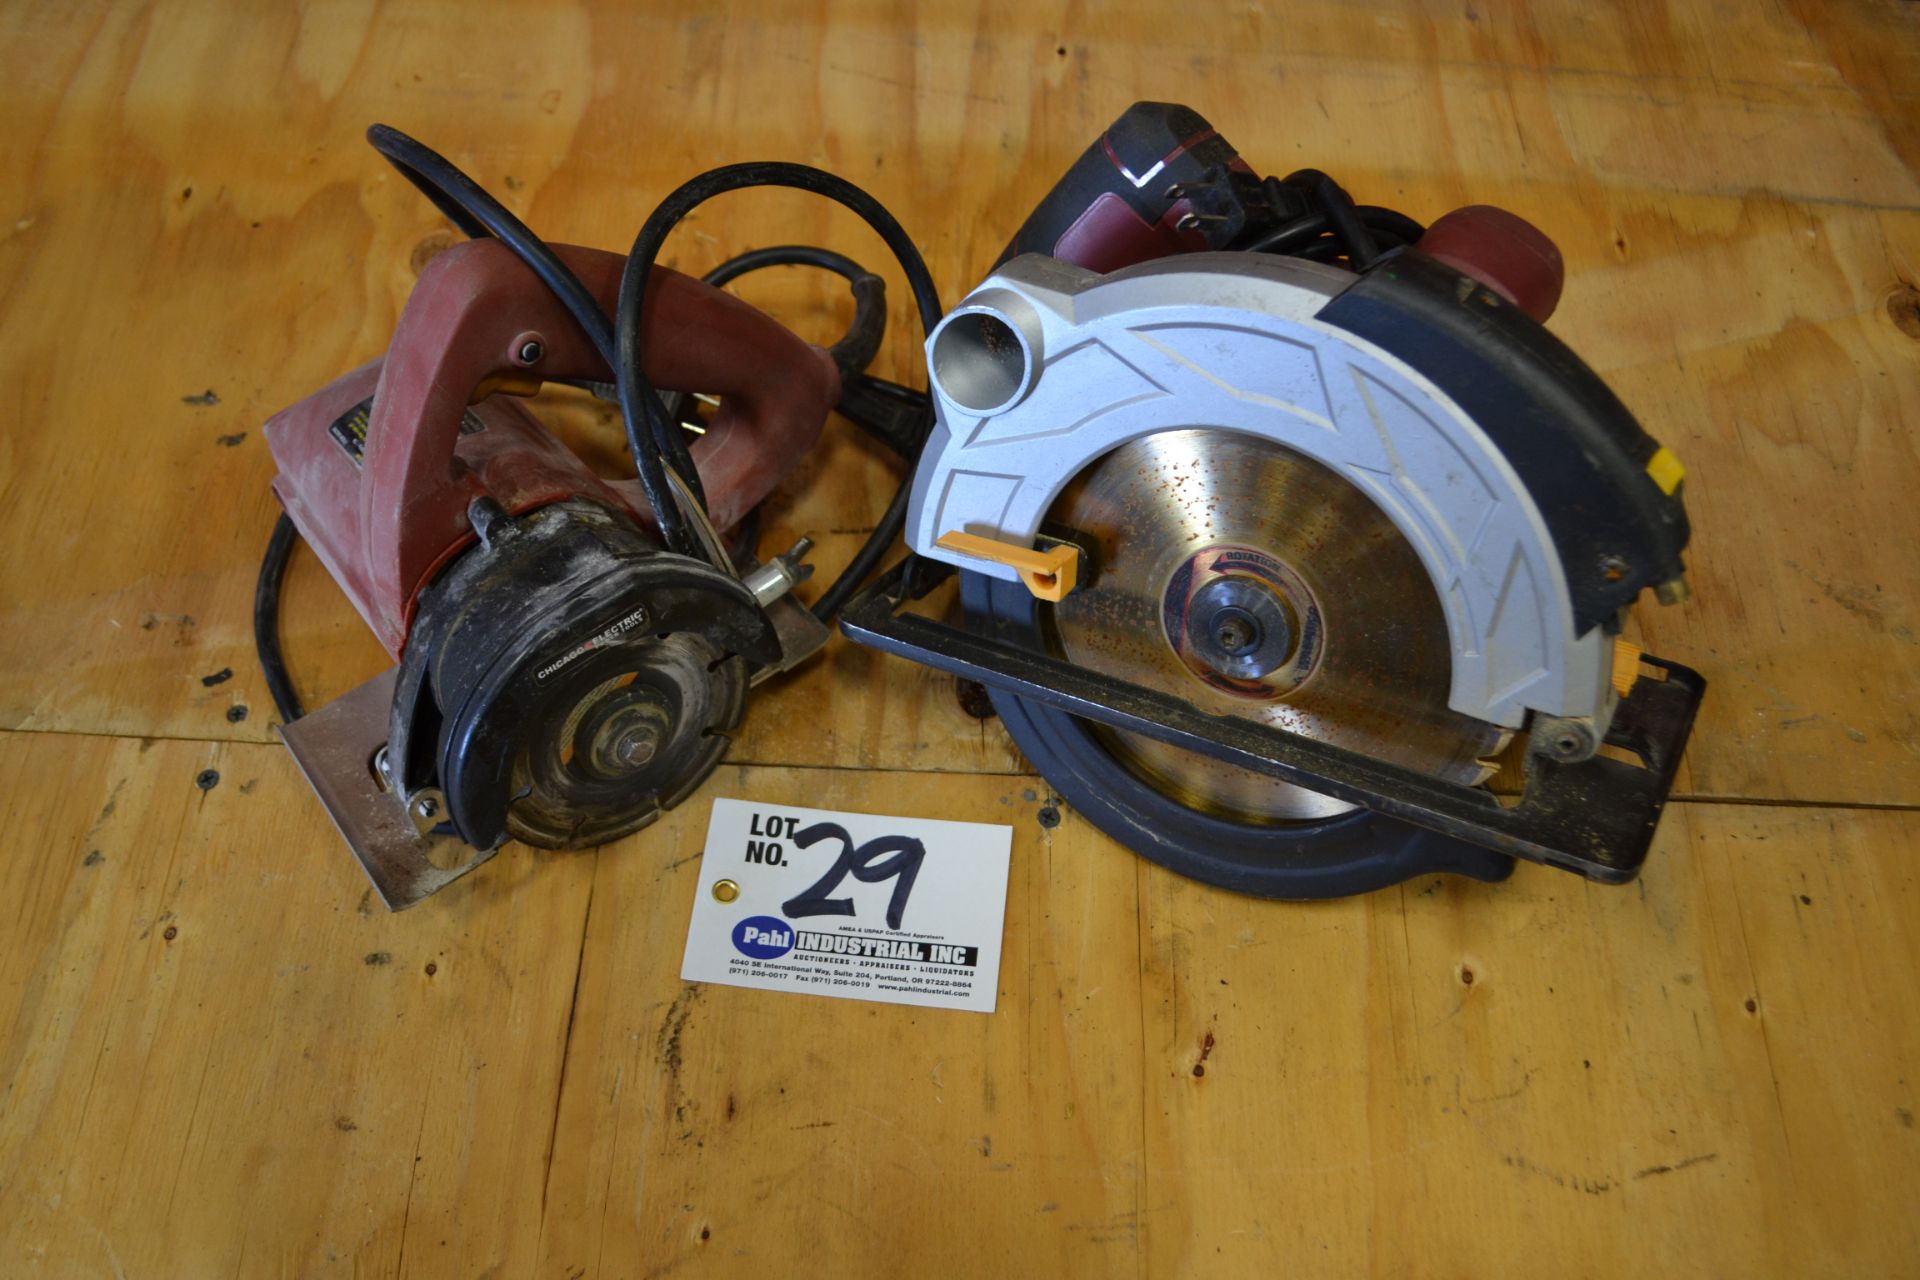 Chicago Electric 7.25" and 4" Circular Saws